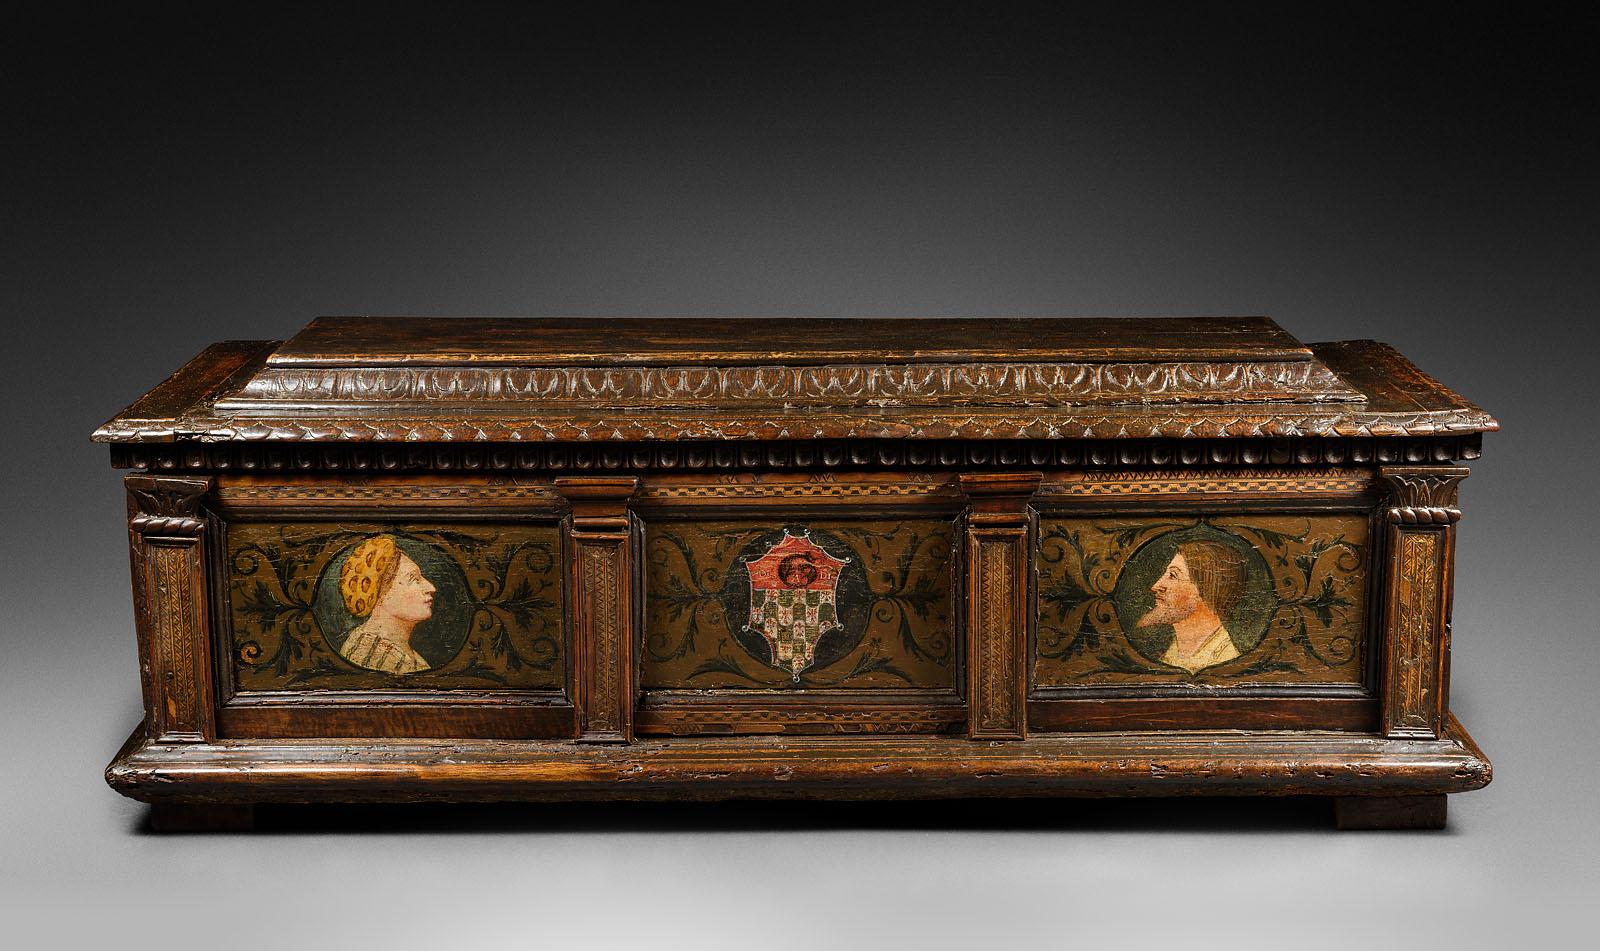 Italian Renaissance wedding cassone

Origin : Northern Italy, Between Milan And Bologne
Period : 15th Century

Height : 55 cm
Width : 156.5 cm
Depth : 57 cm

Walnut
Usual restoration


Expression of a family alliance, the wedding chest